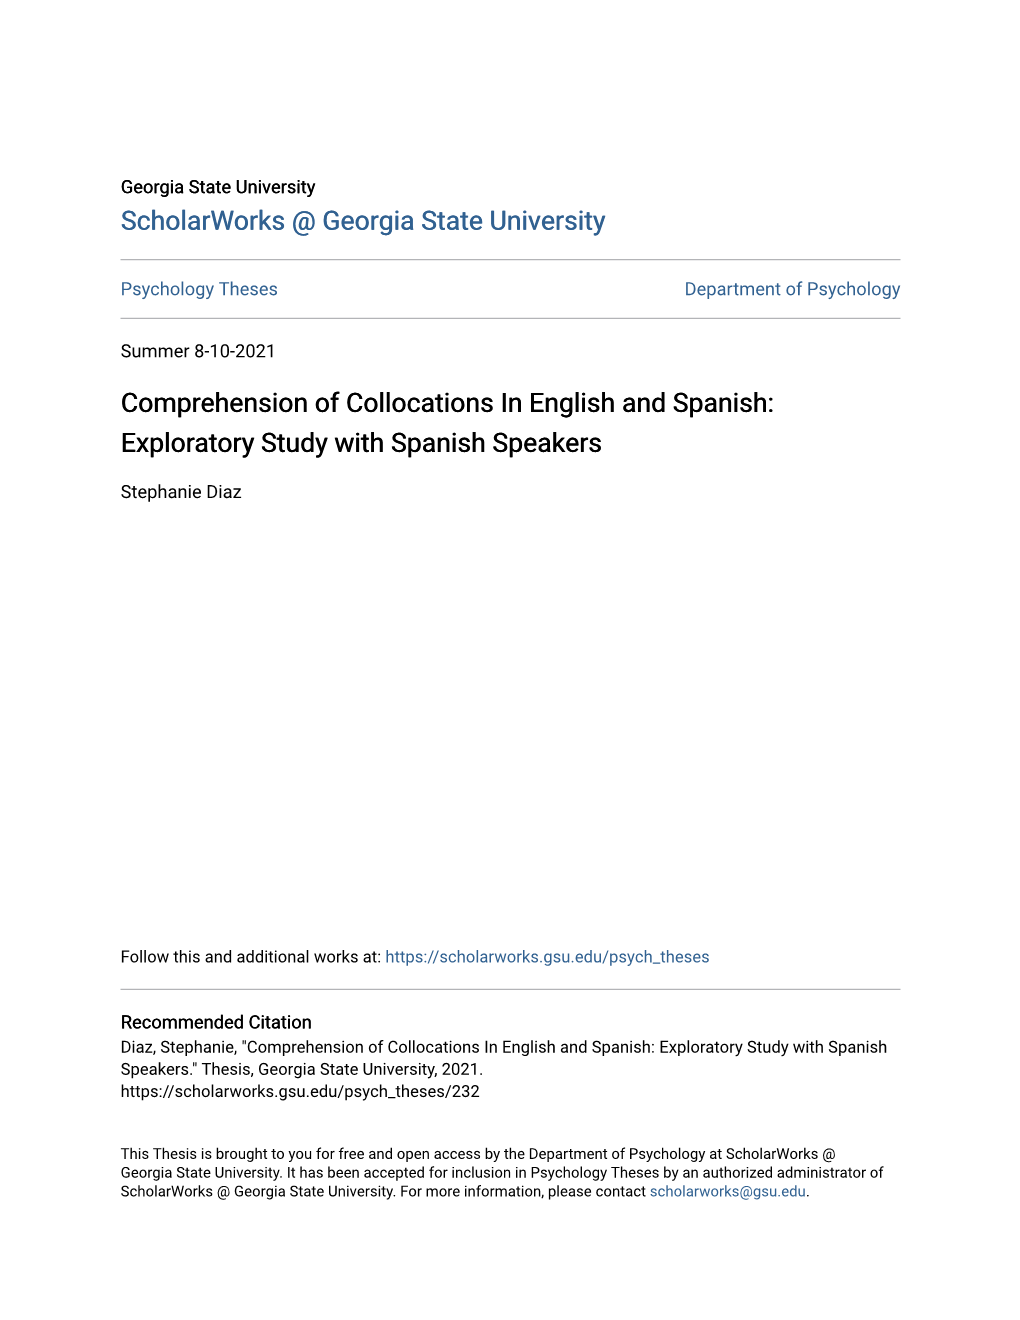 Comprehension of Collocations in English and Spanish: Exploratory Study with Spanish Speakers